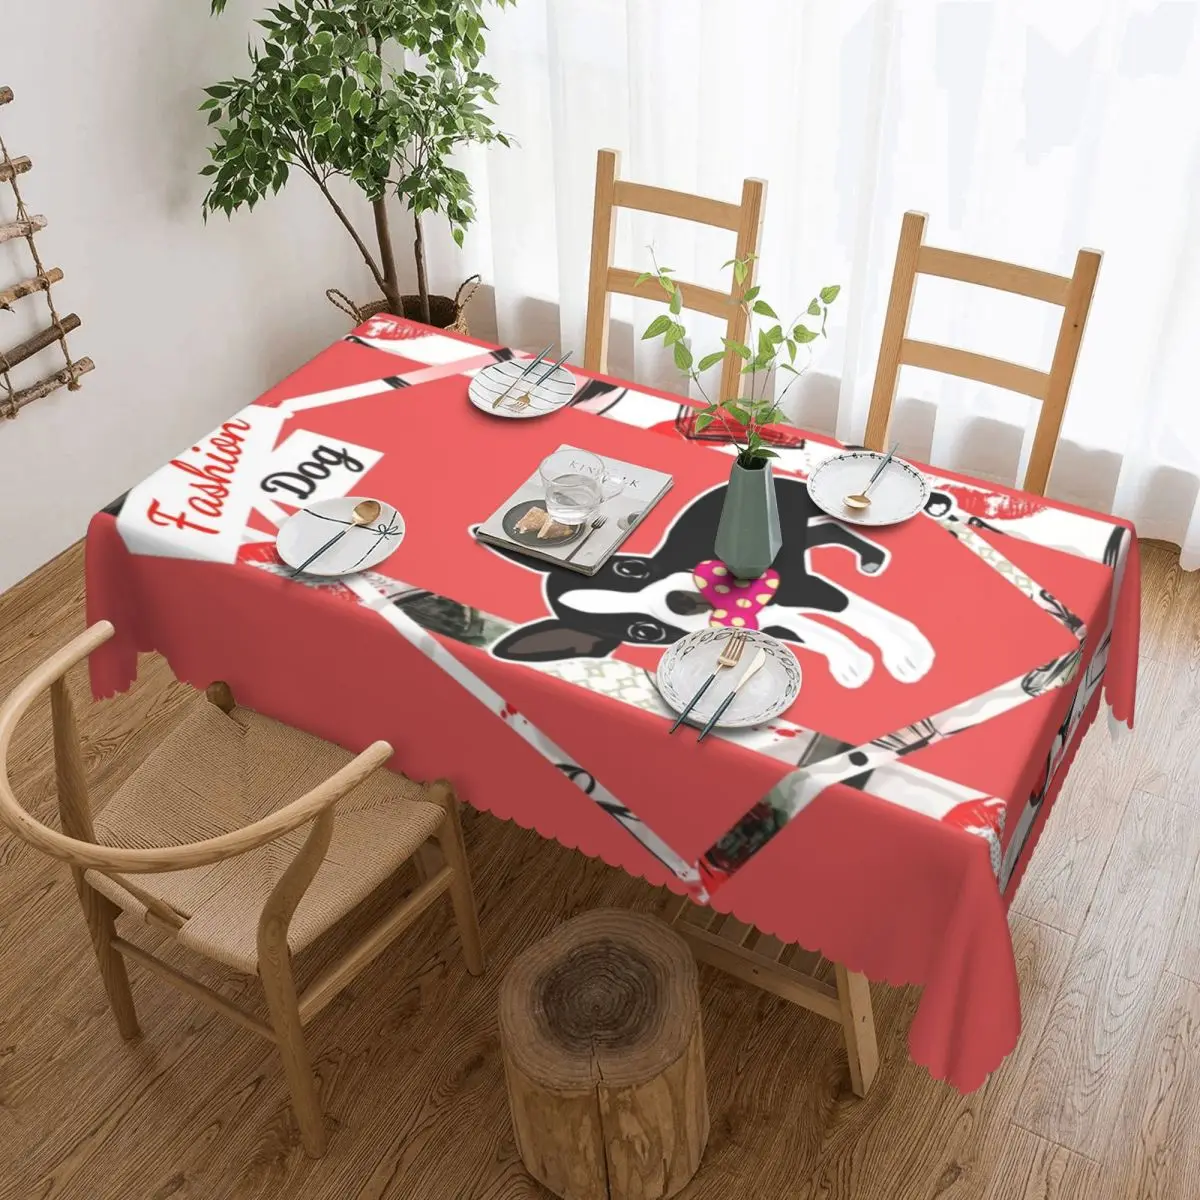 

French Bulldog Fashion Dogs Rectangular Tablecloth Oilproof Table Cloth Frenchie Dog Lover Pet Ainmal Table Cover